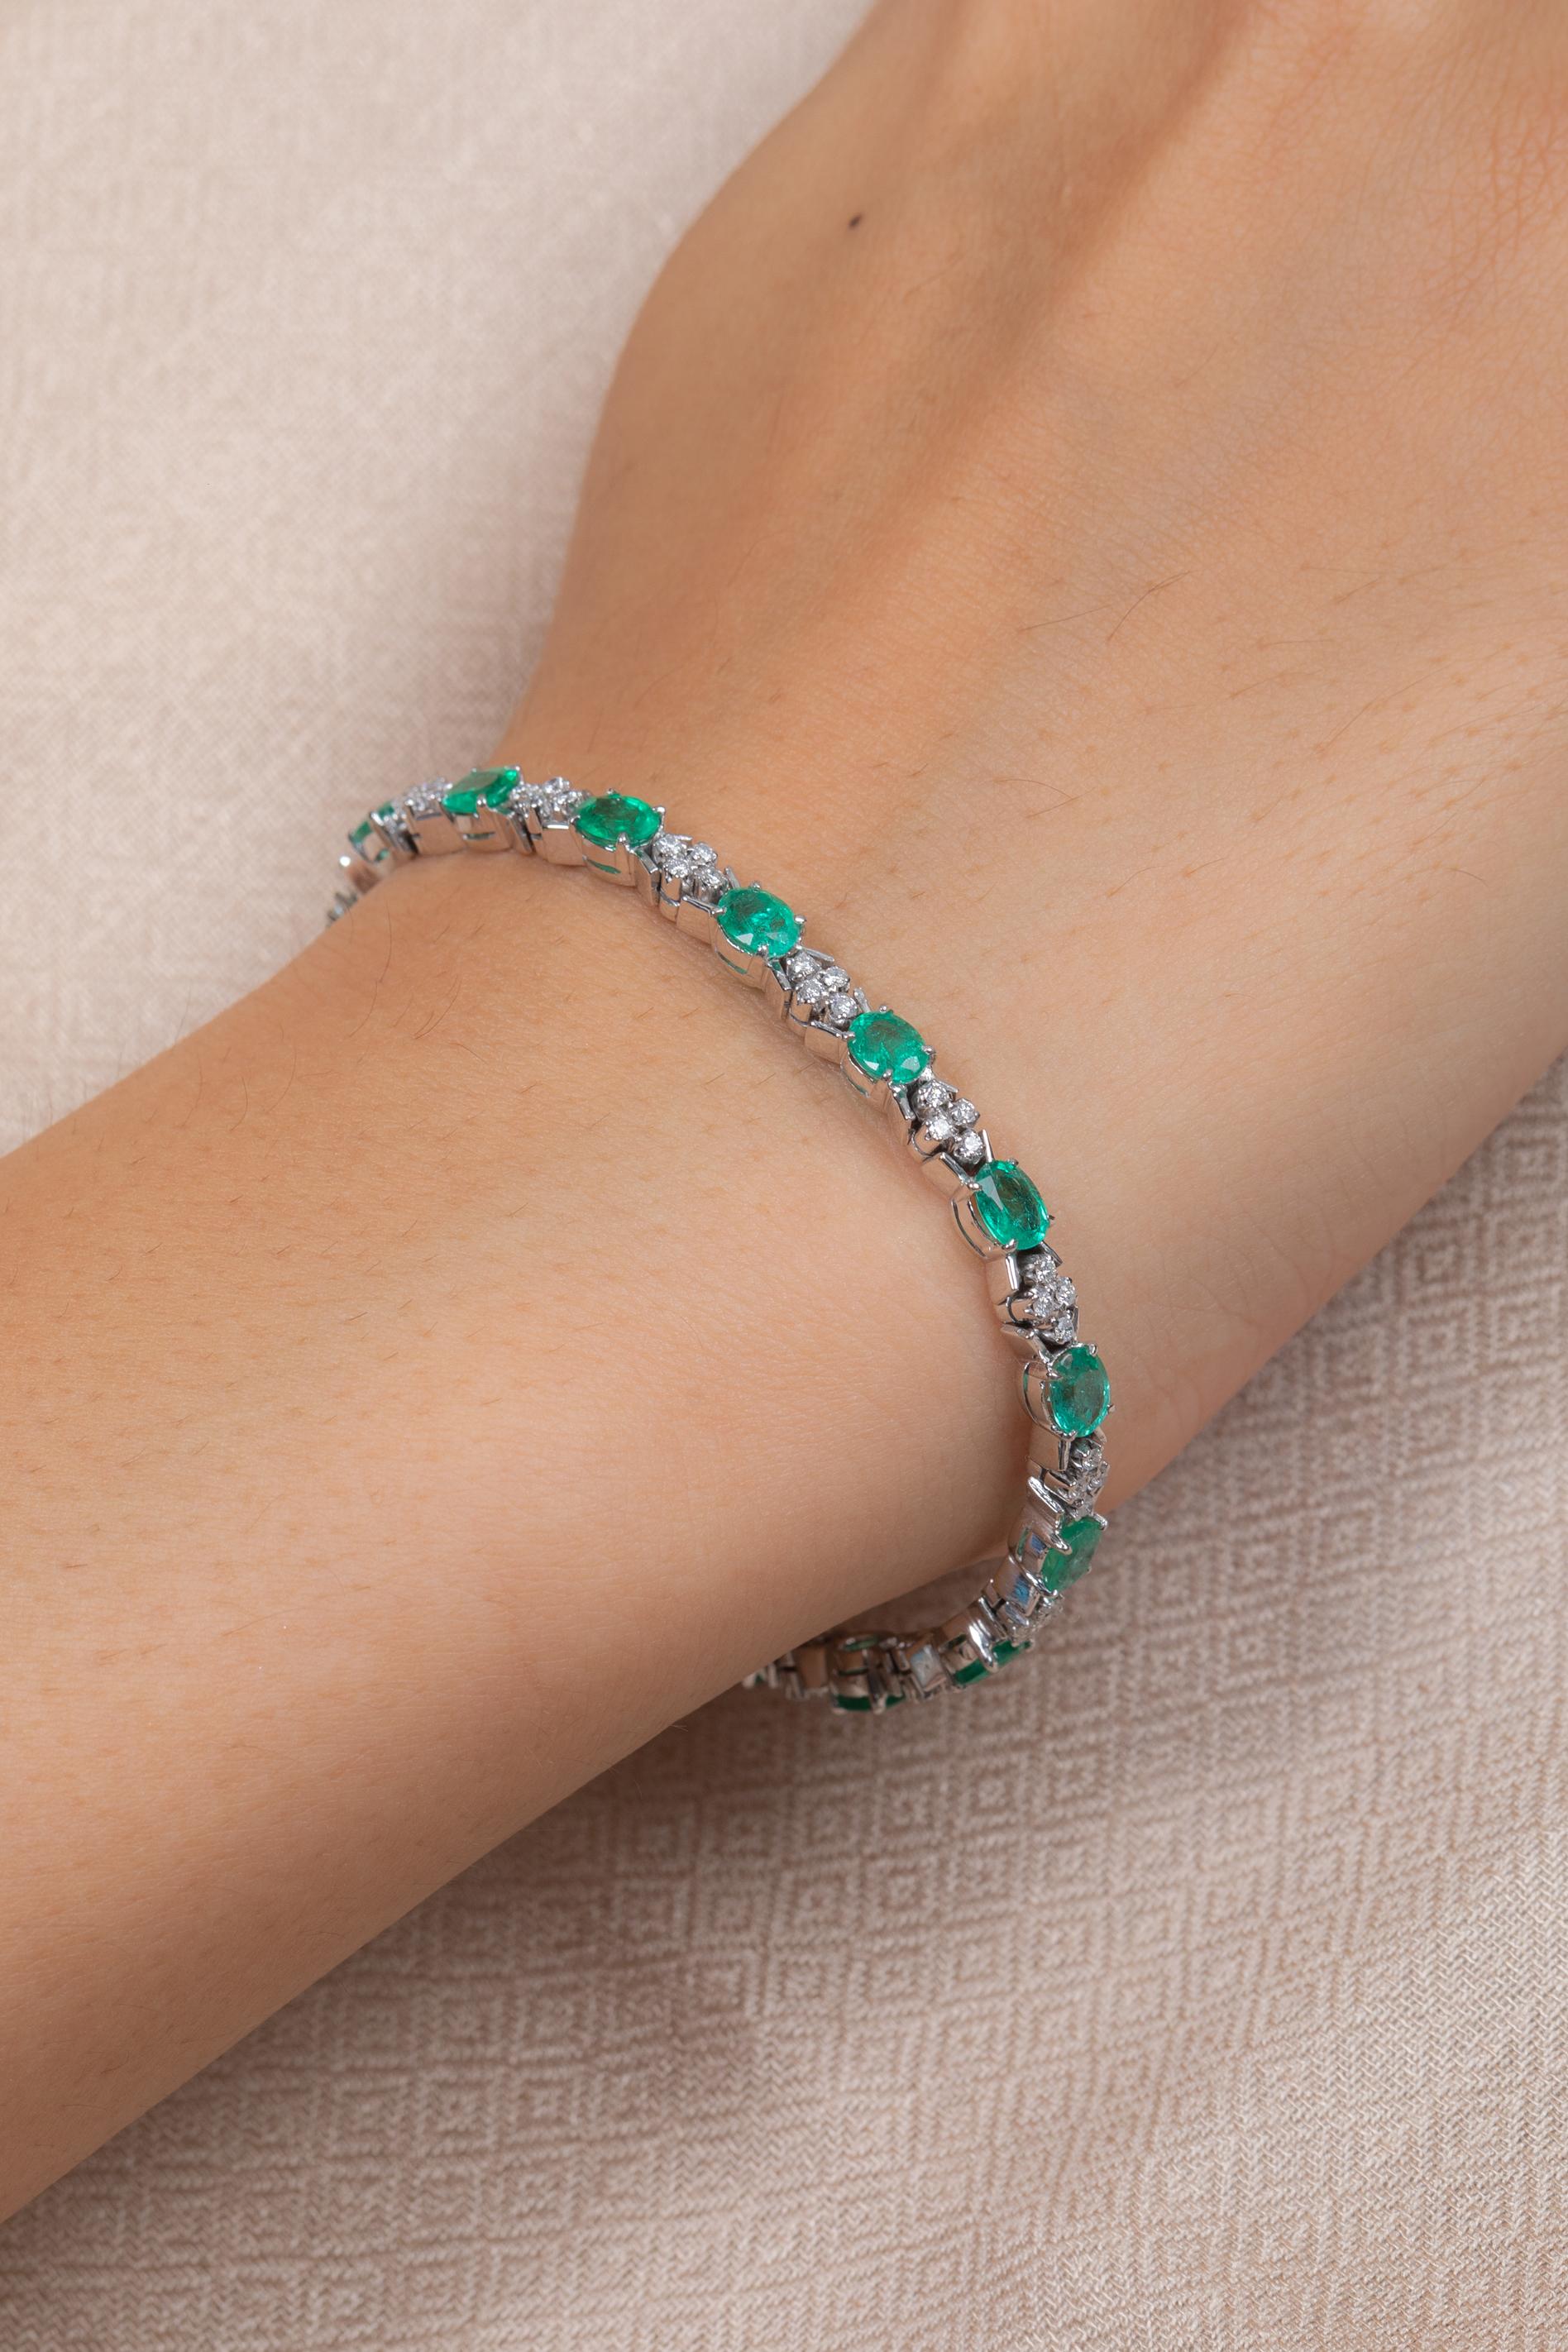 Emerald and Diamond bracelet in 18K Gold. It has a perfect oval cut gemstone to make you stand out on any occasion or an event.
A tennis bracelet is an essential piece of jewelry when it comes to your wedding day. The sleek and elegant style